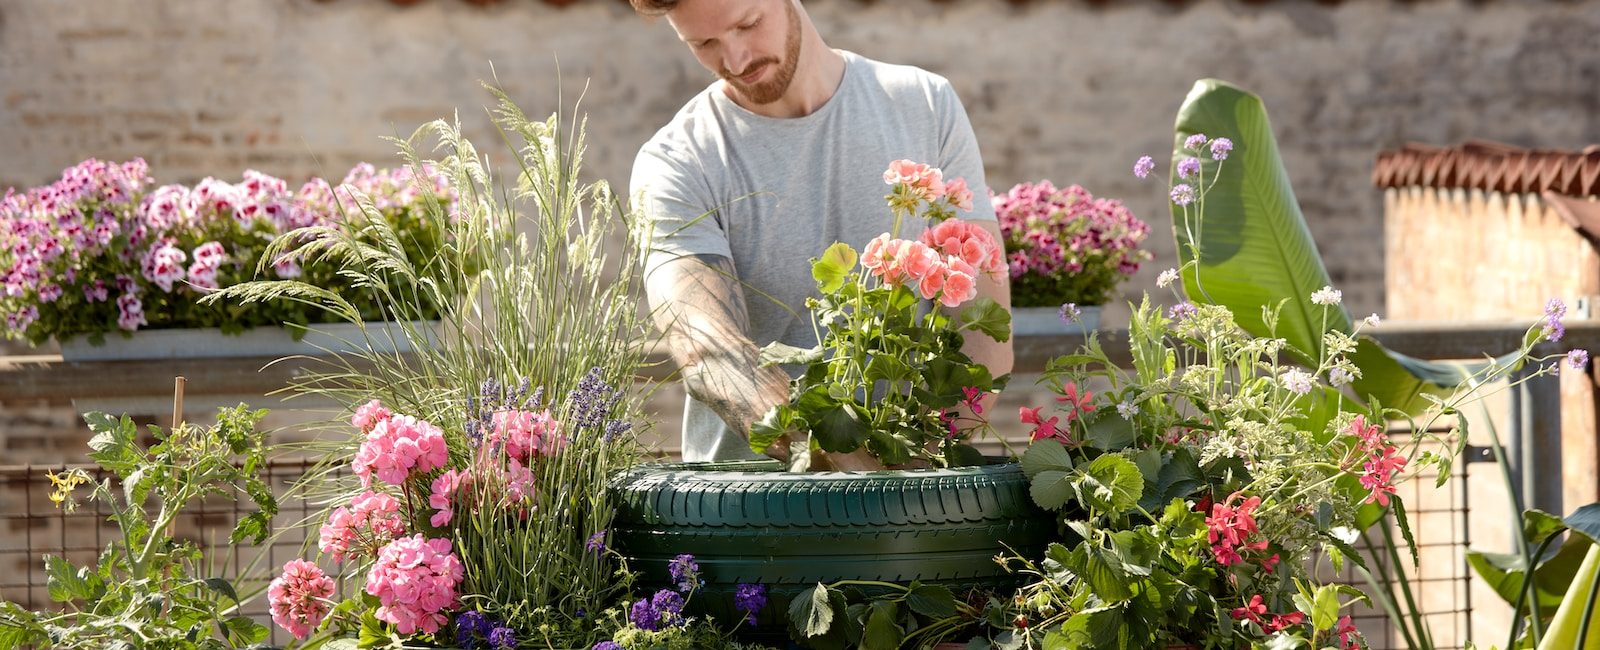 Sustainable Practices Every Gardener Should Adopt